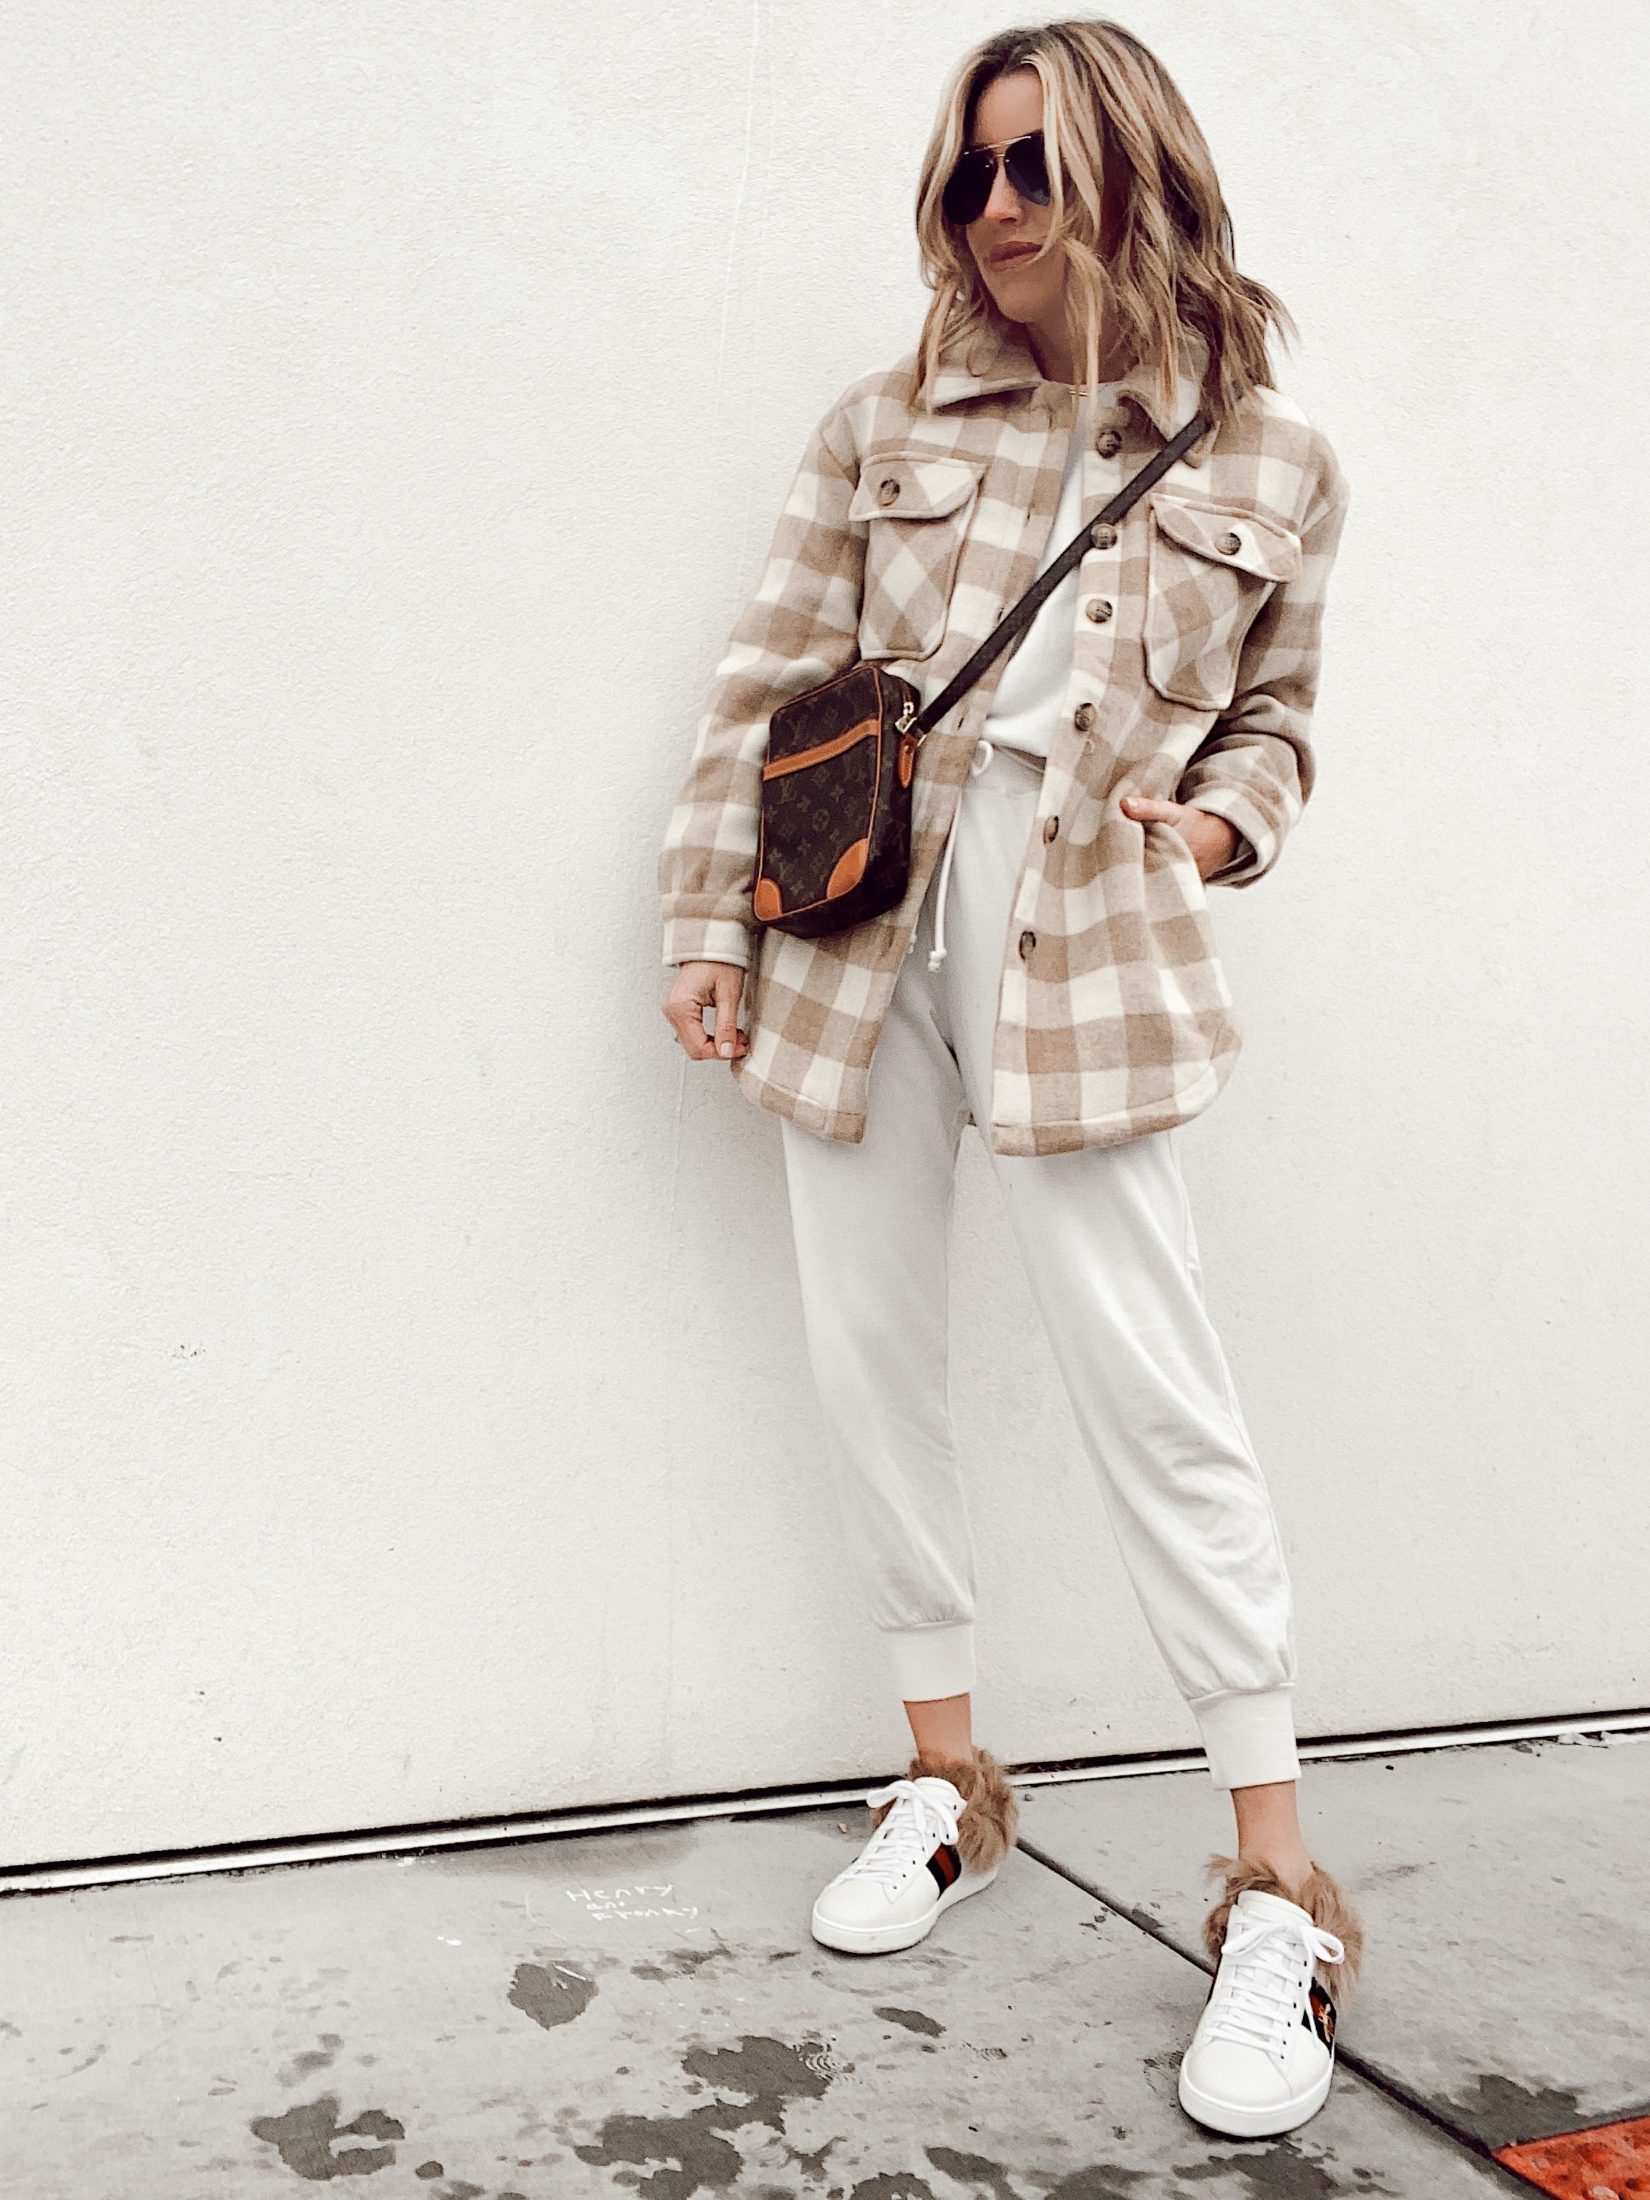 jaime shrayber wearing gucci faux fur ace sneakers